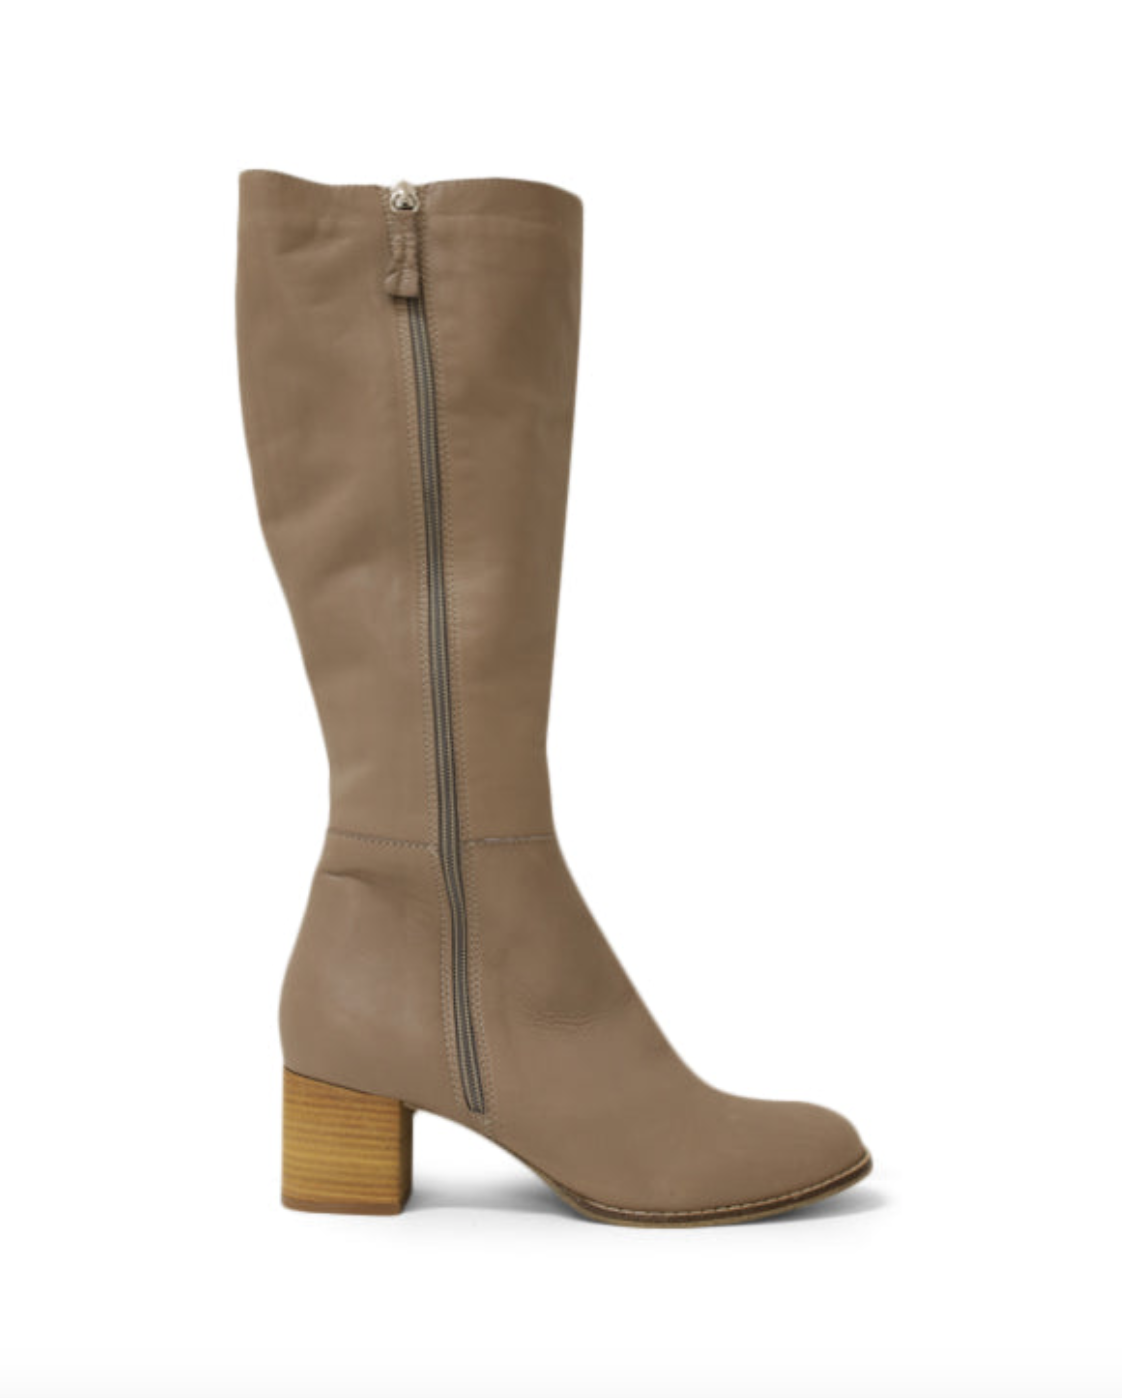 Bueno Emily Long Boots - beige side view